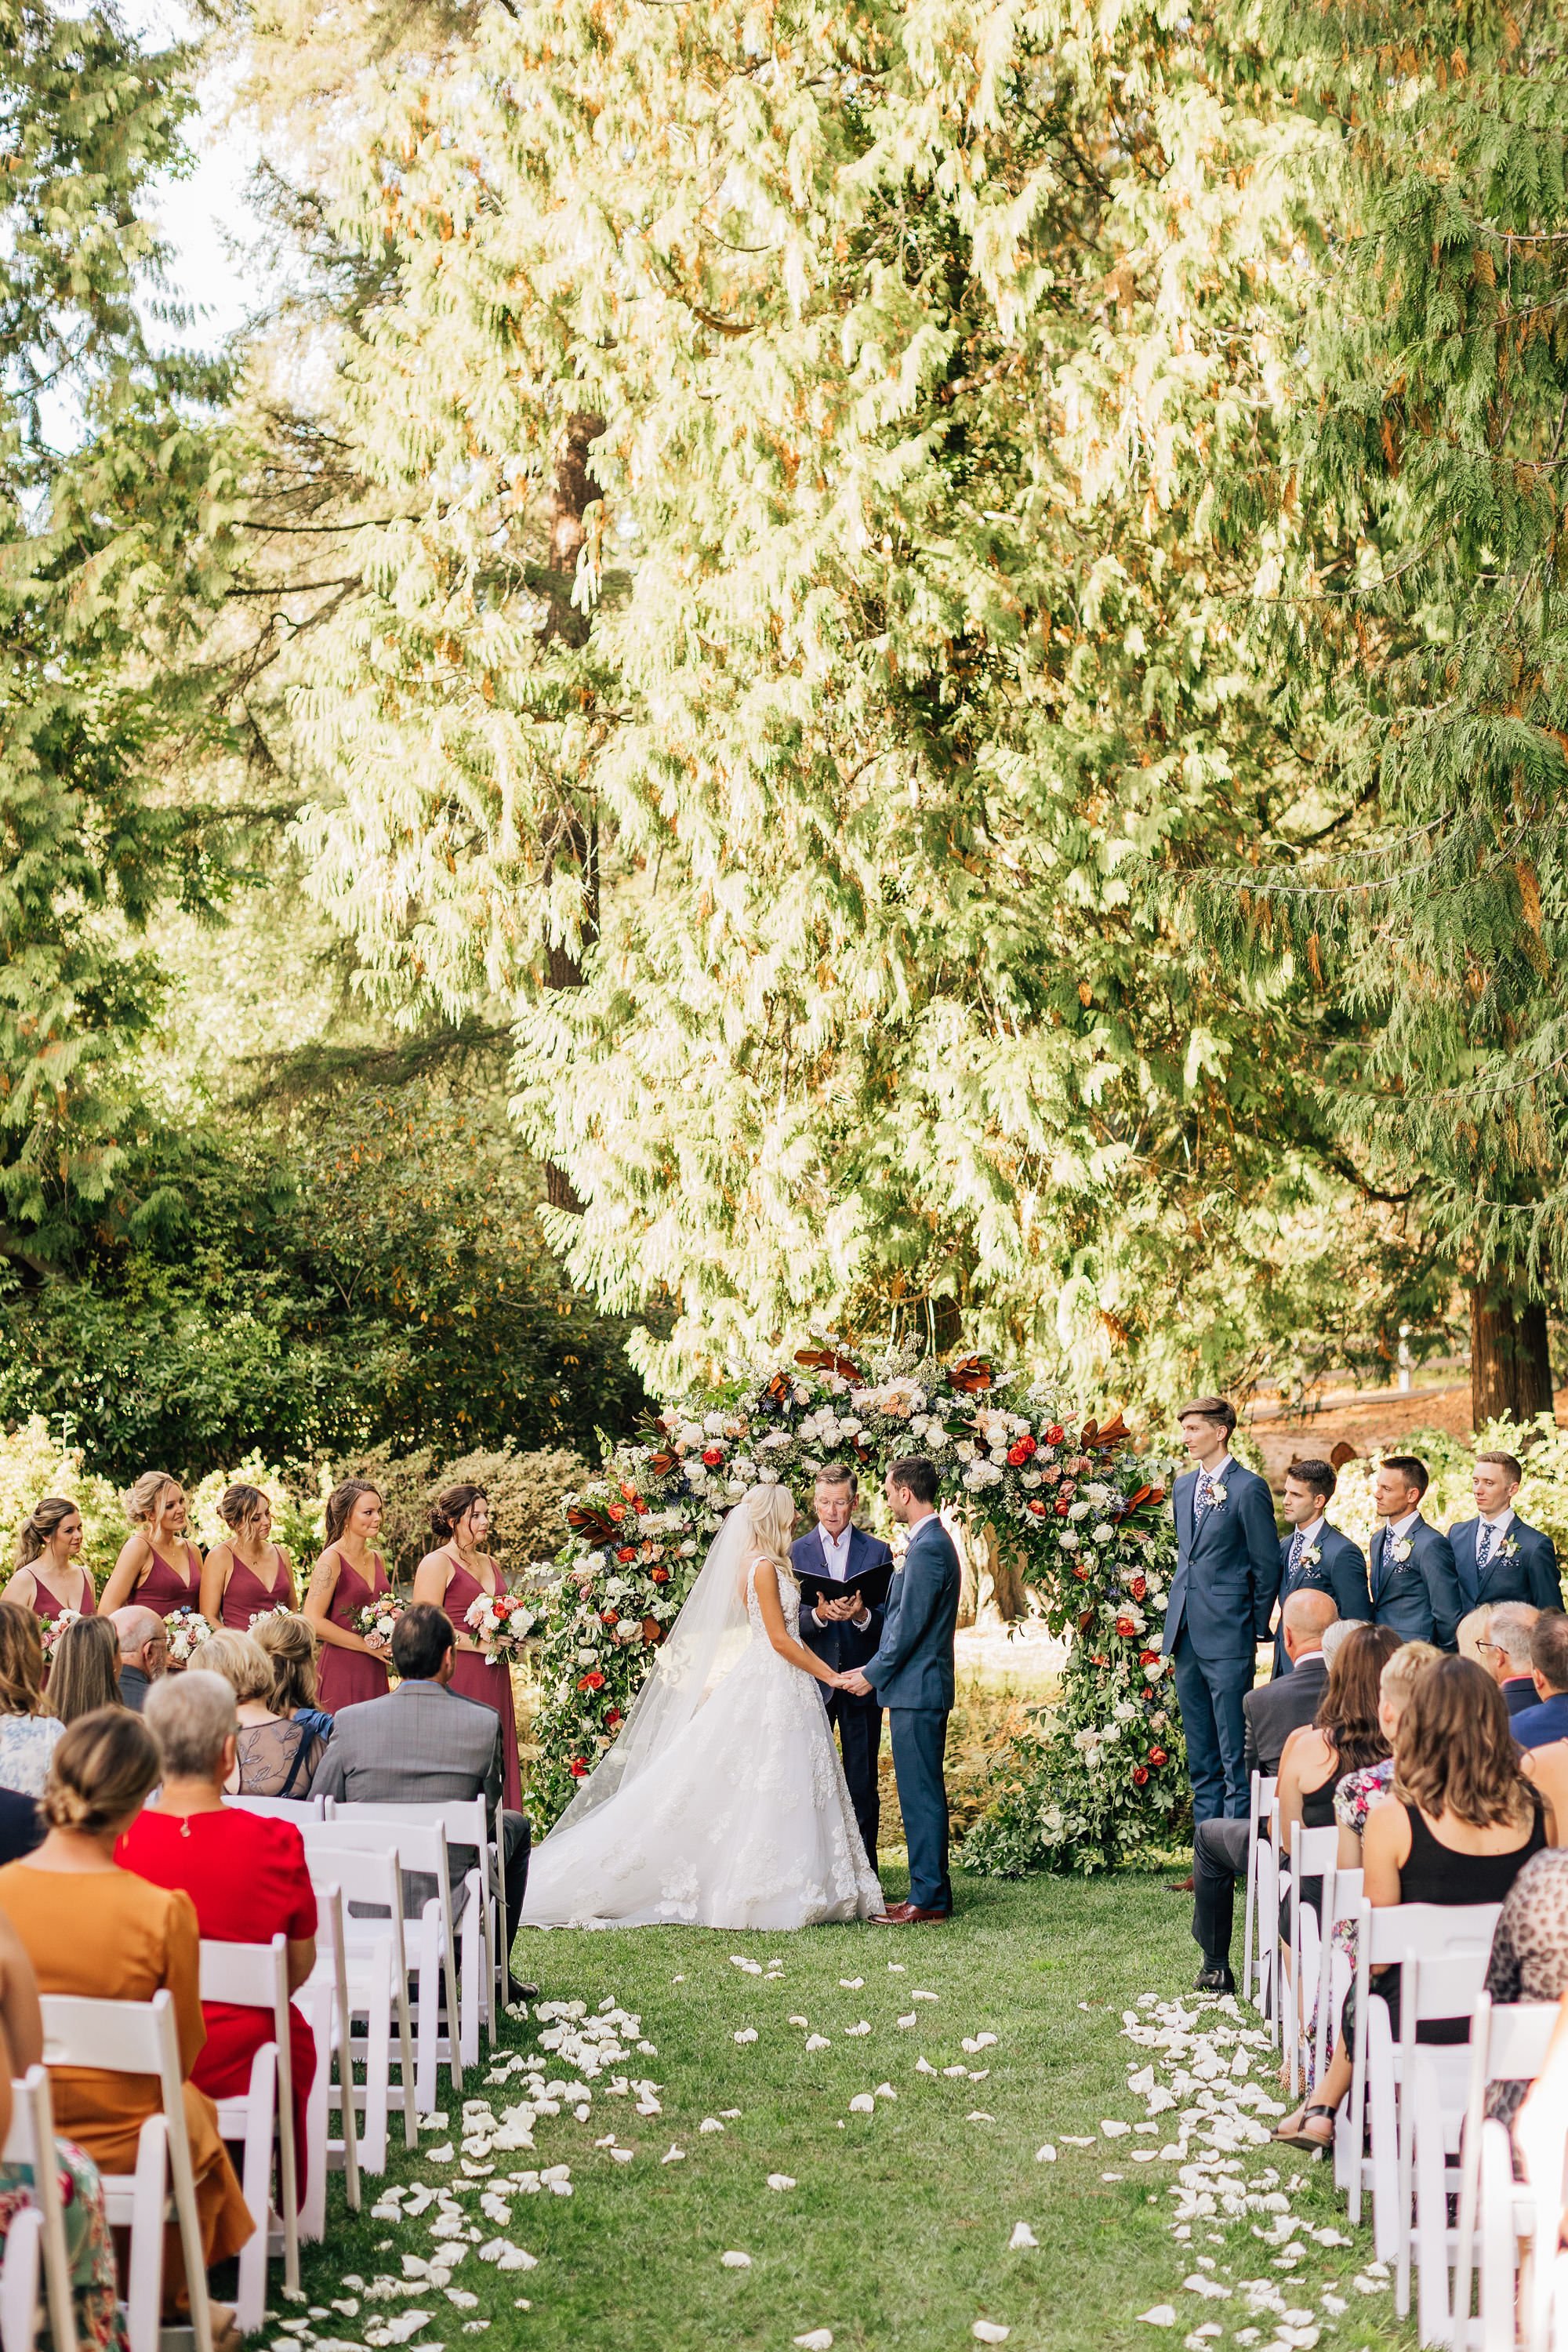 Chateau-lill-woodinville-winery-wedding-venue-outdoors-seattle-wedding-planner-pacific-engagements-wedding-planning